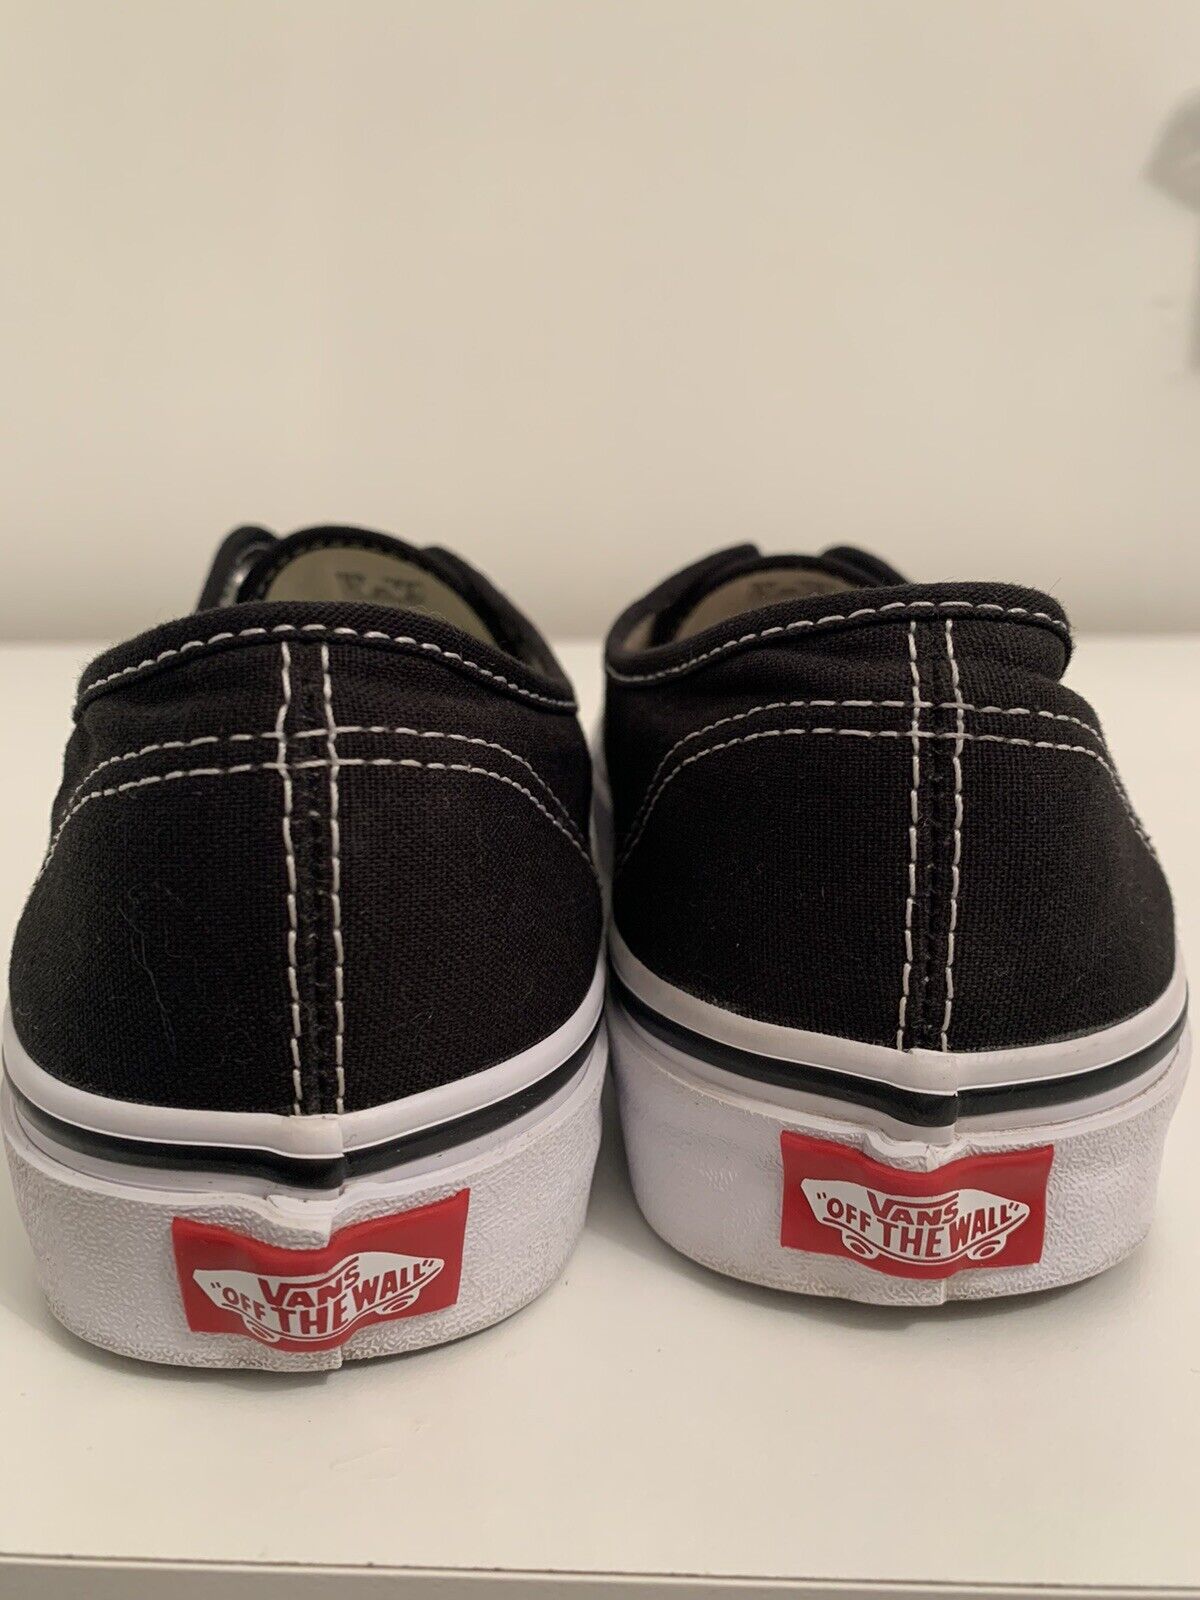 Vans Authentic black and white skate shoe - image 2